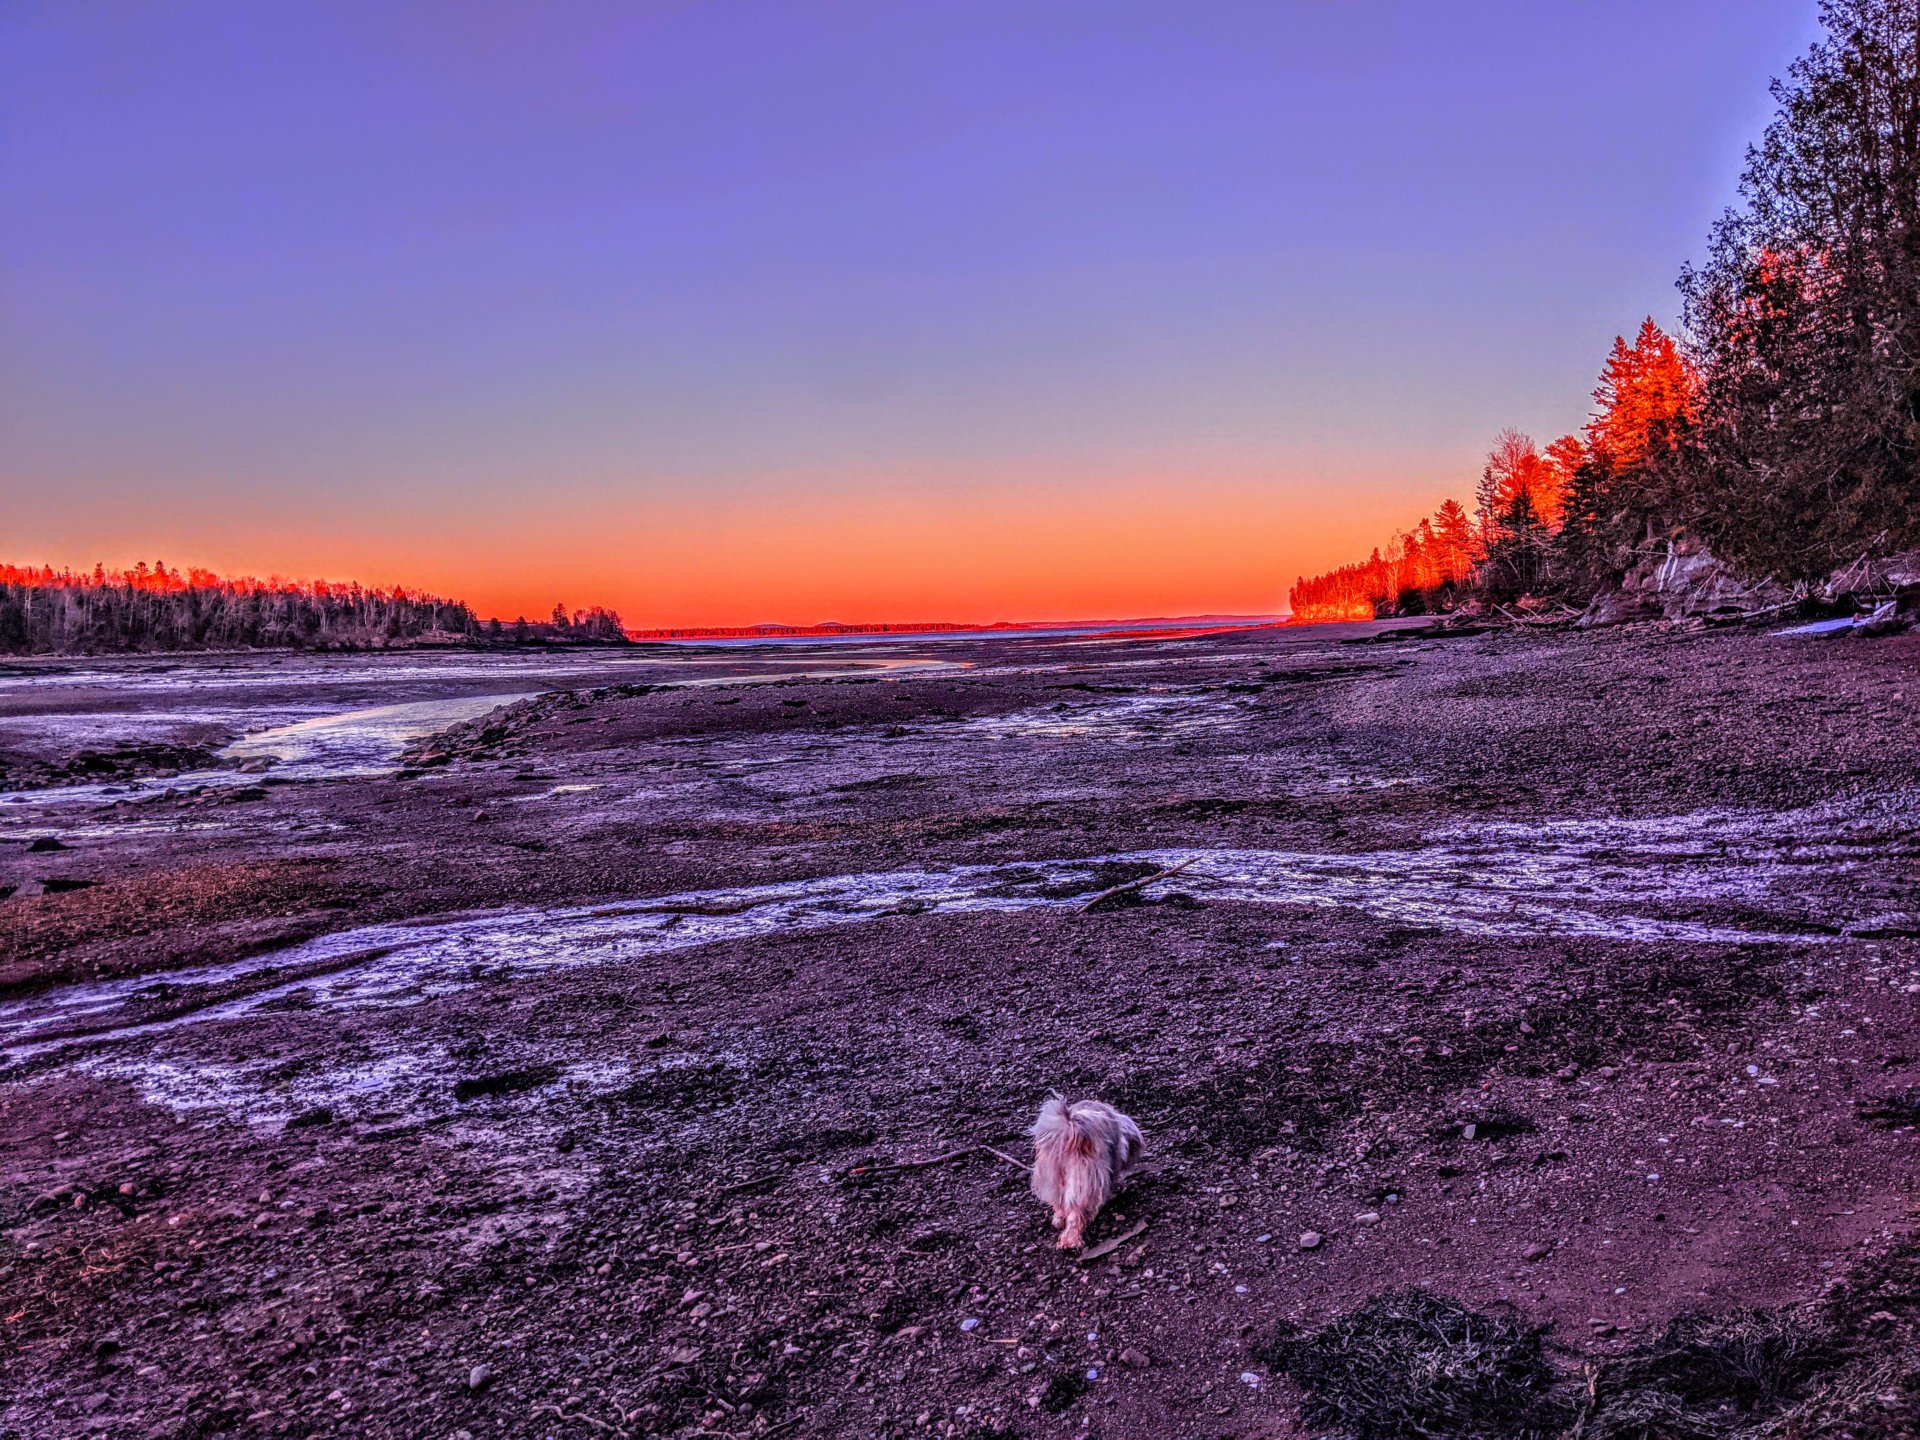 Lewis Cove, Perry, Maine. Sunset, low tide.